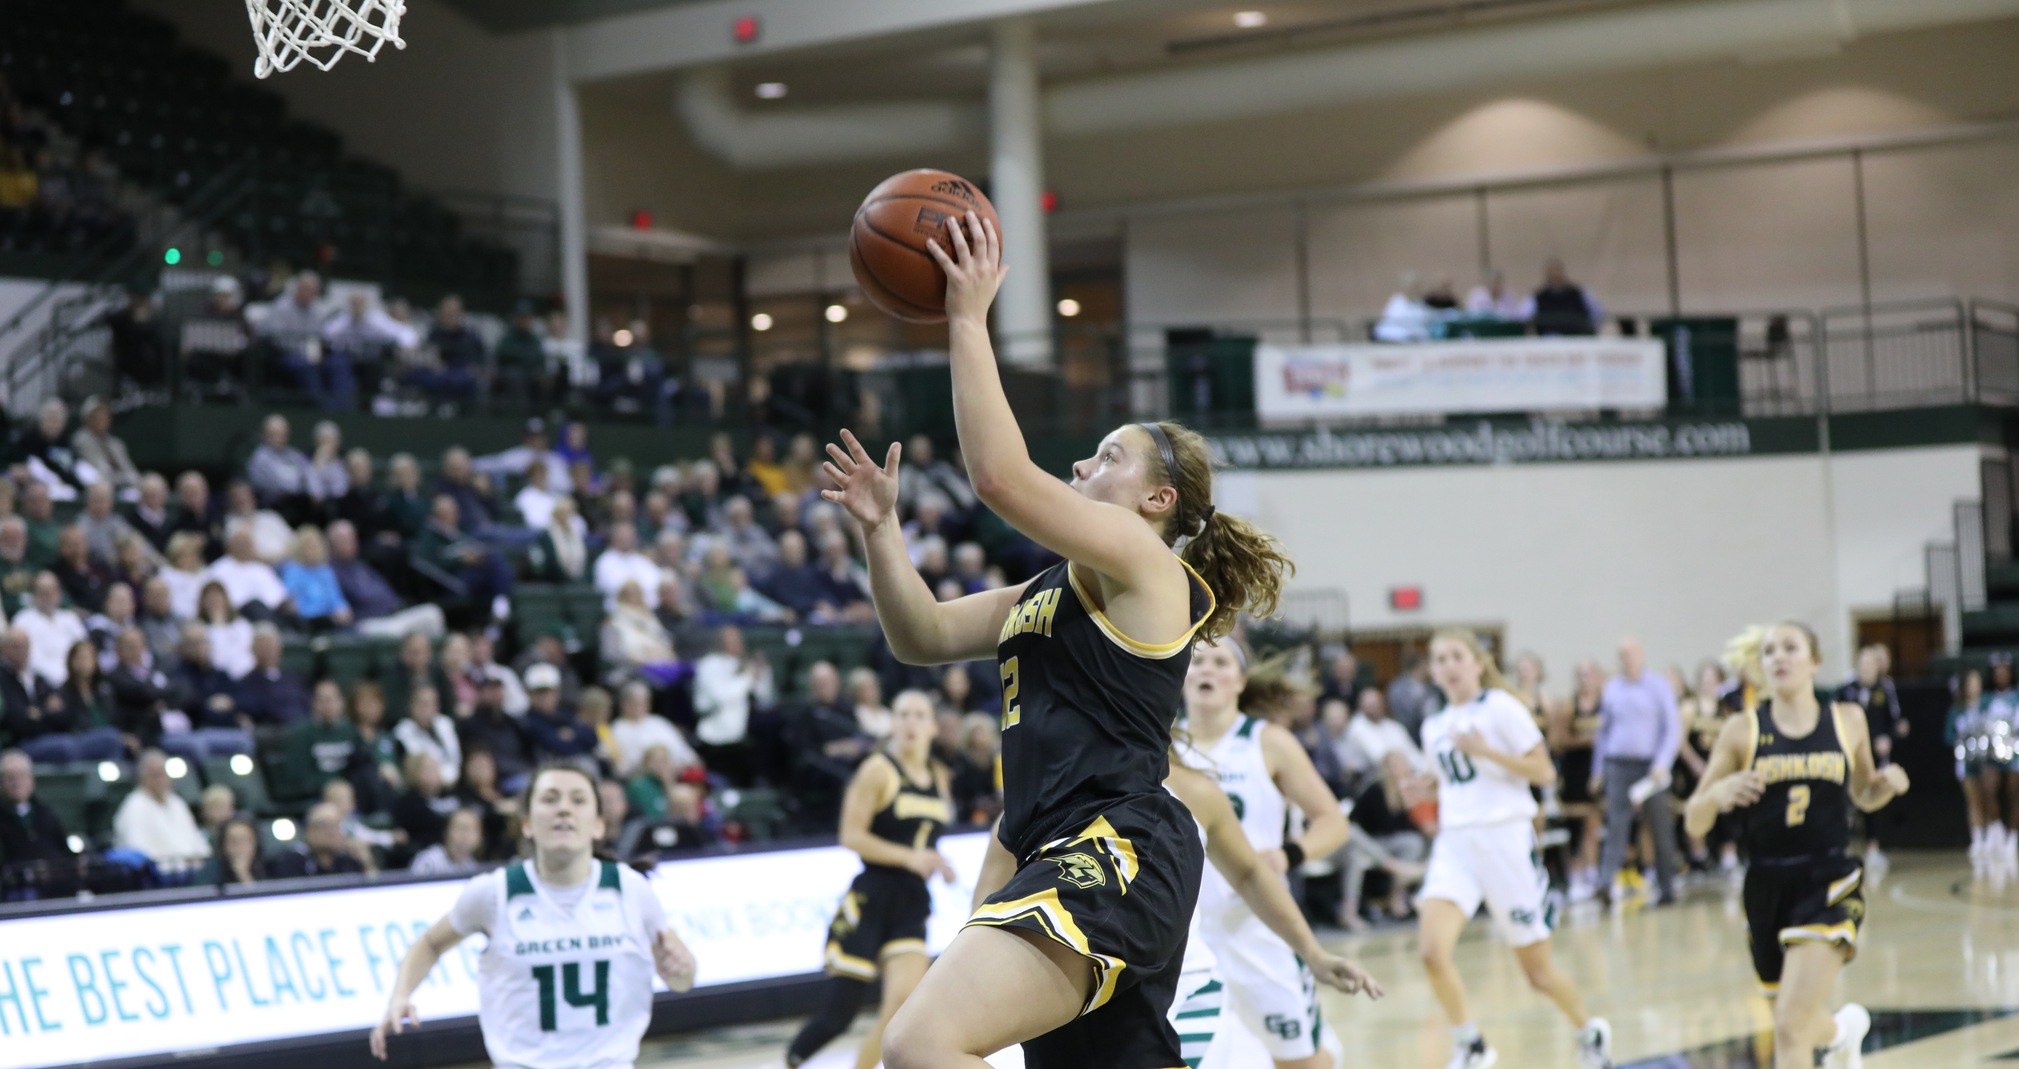 Leah Porath scored 19 points and collected nine rebounds against the Polar Bears.